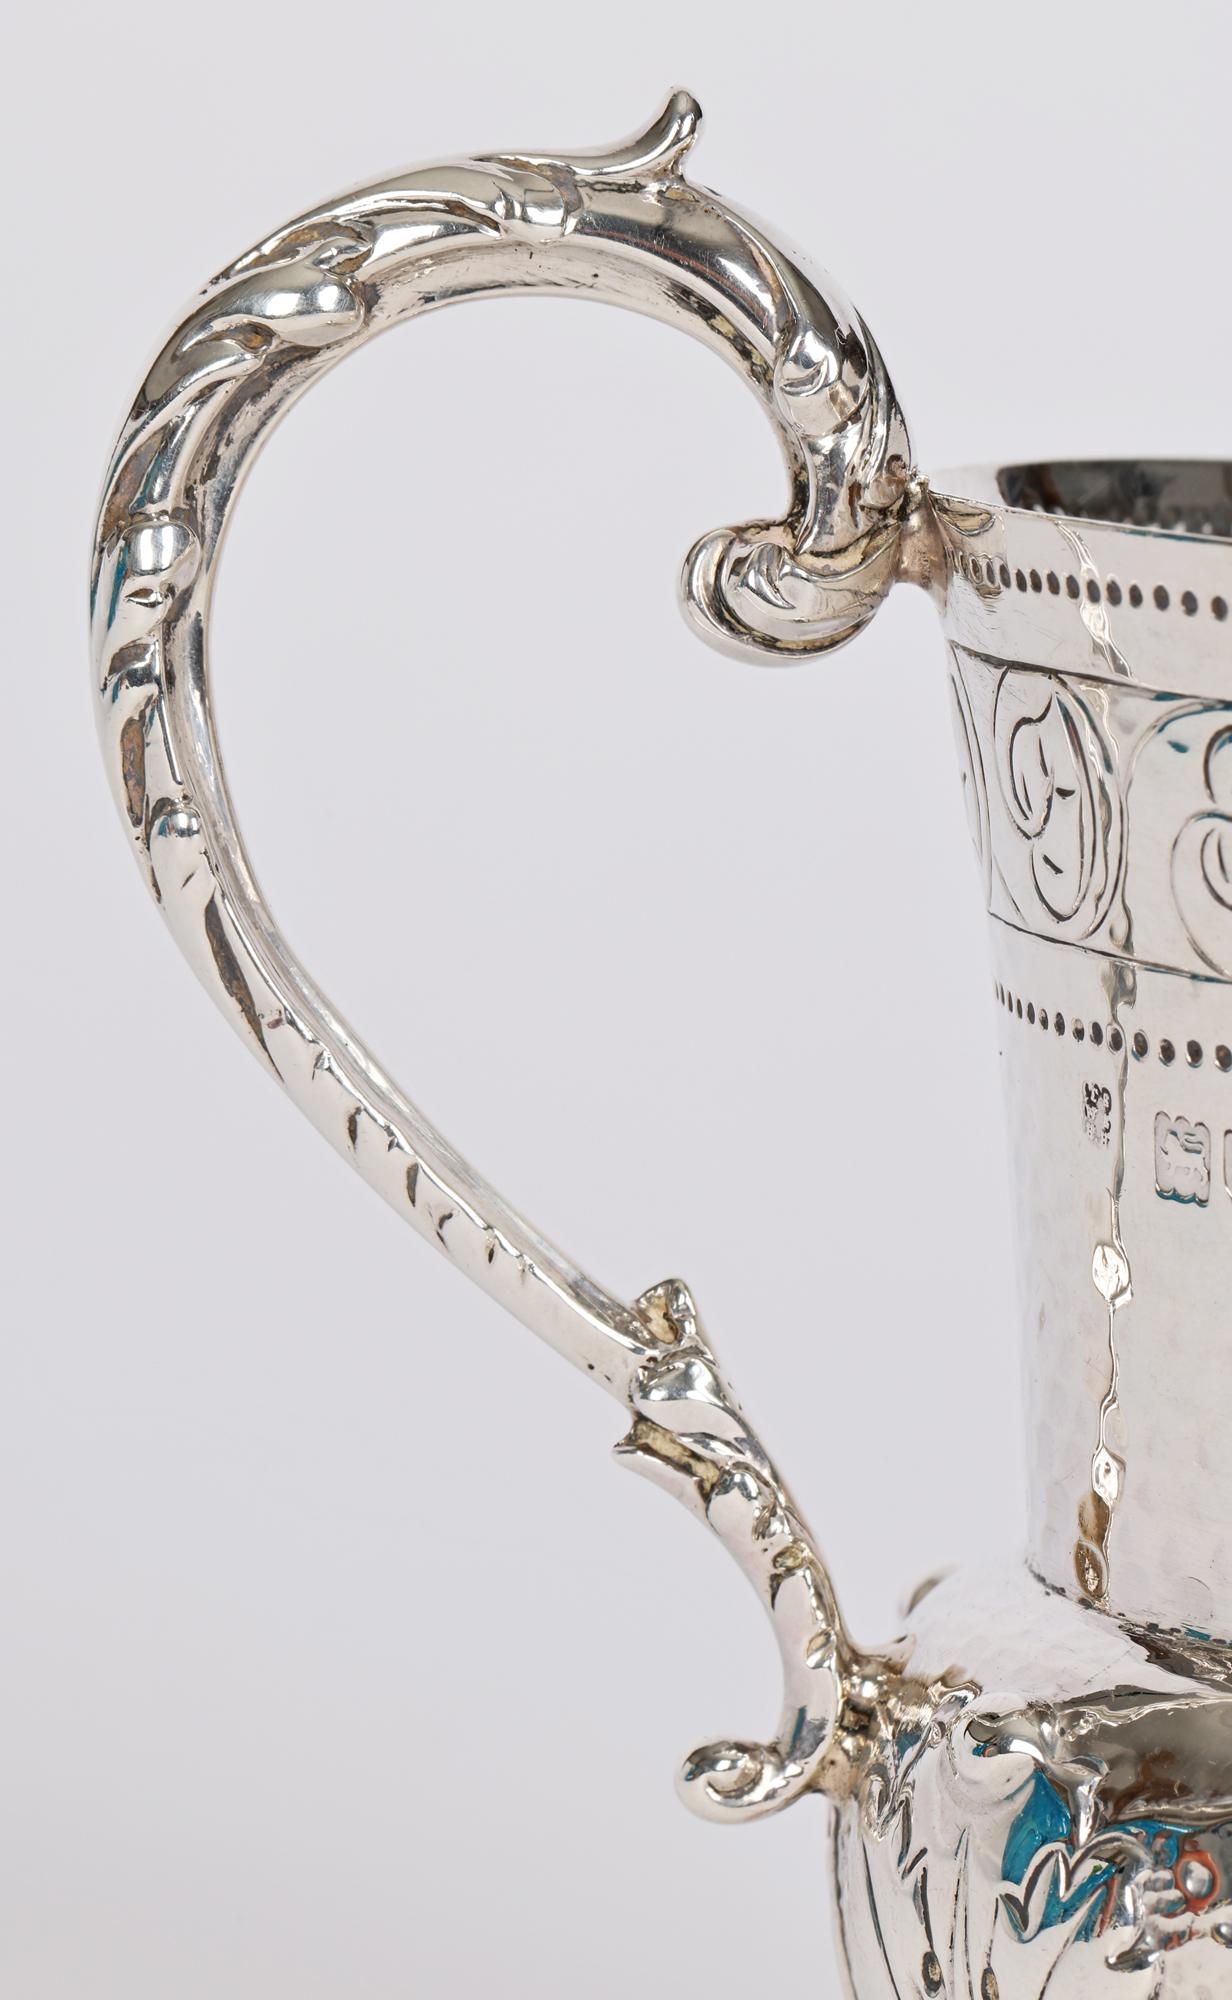 An exceptional and very impressive quality Arts & Crafts silver christening mug decorated with leaf designs by Holland Aldwinckle & Slater, London and dated 1900. The heavily made flower bud shaped mug is finely crafted standing raised on a round